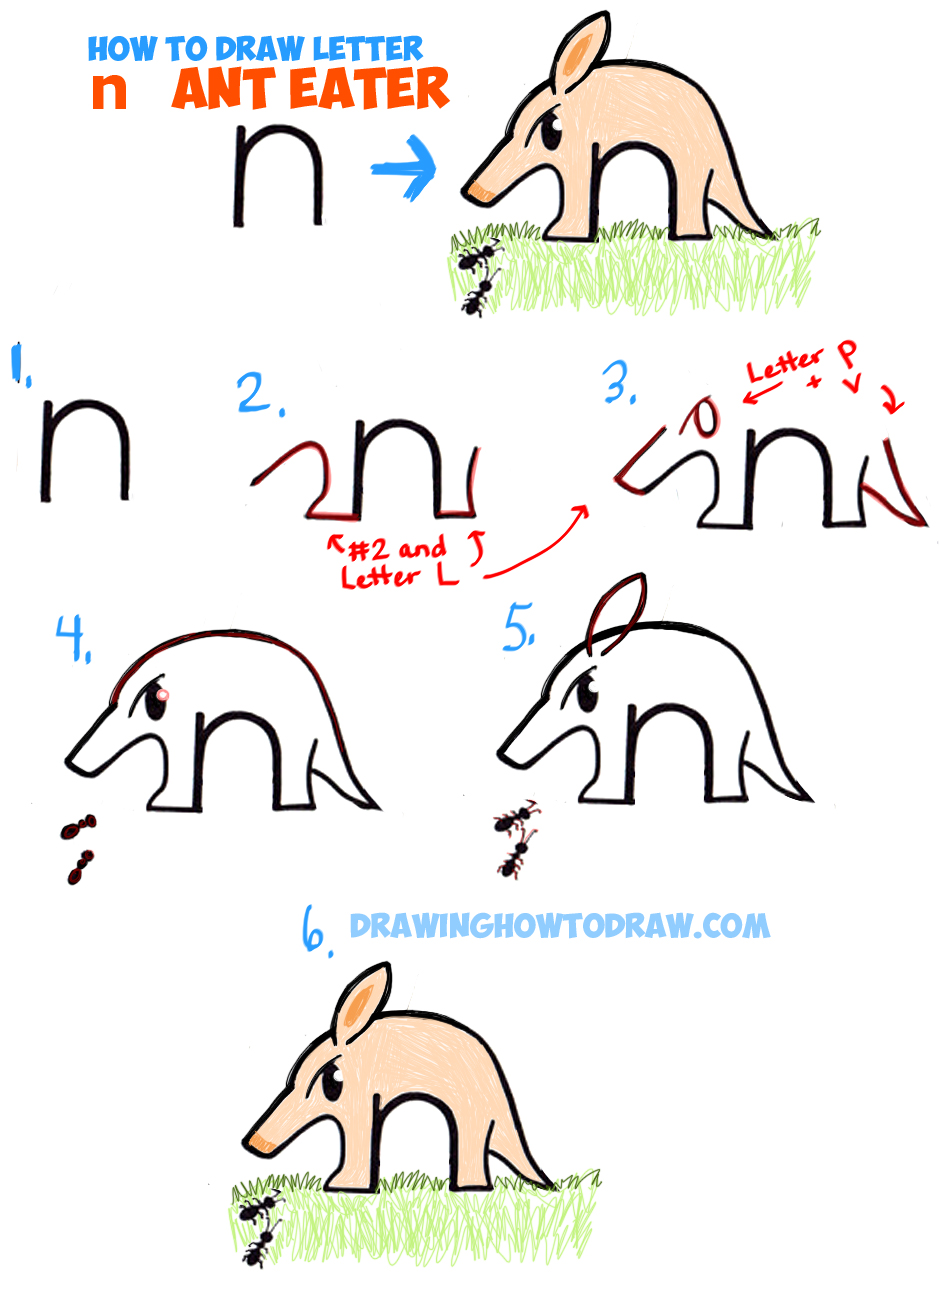 Learn How to Draw Cartoon Anteater from Lowercase Letter n - Simple Step by Step Drawing Tutorial for Kids